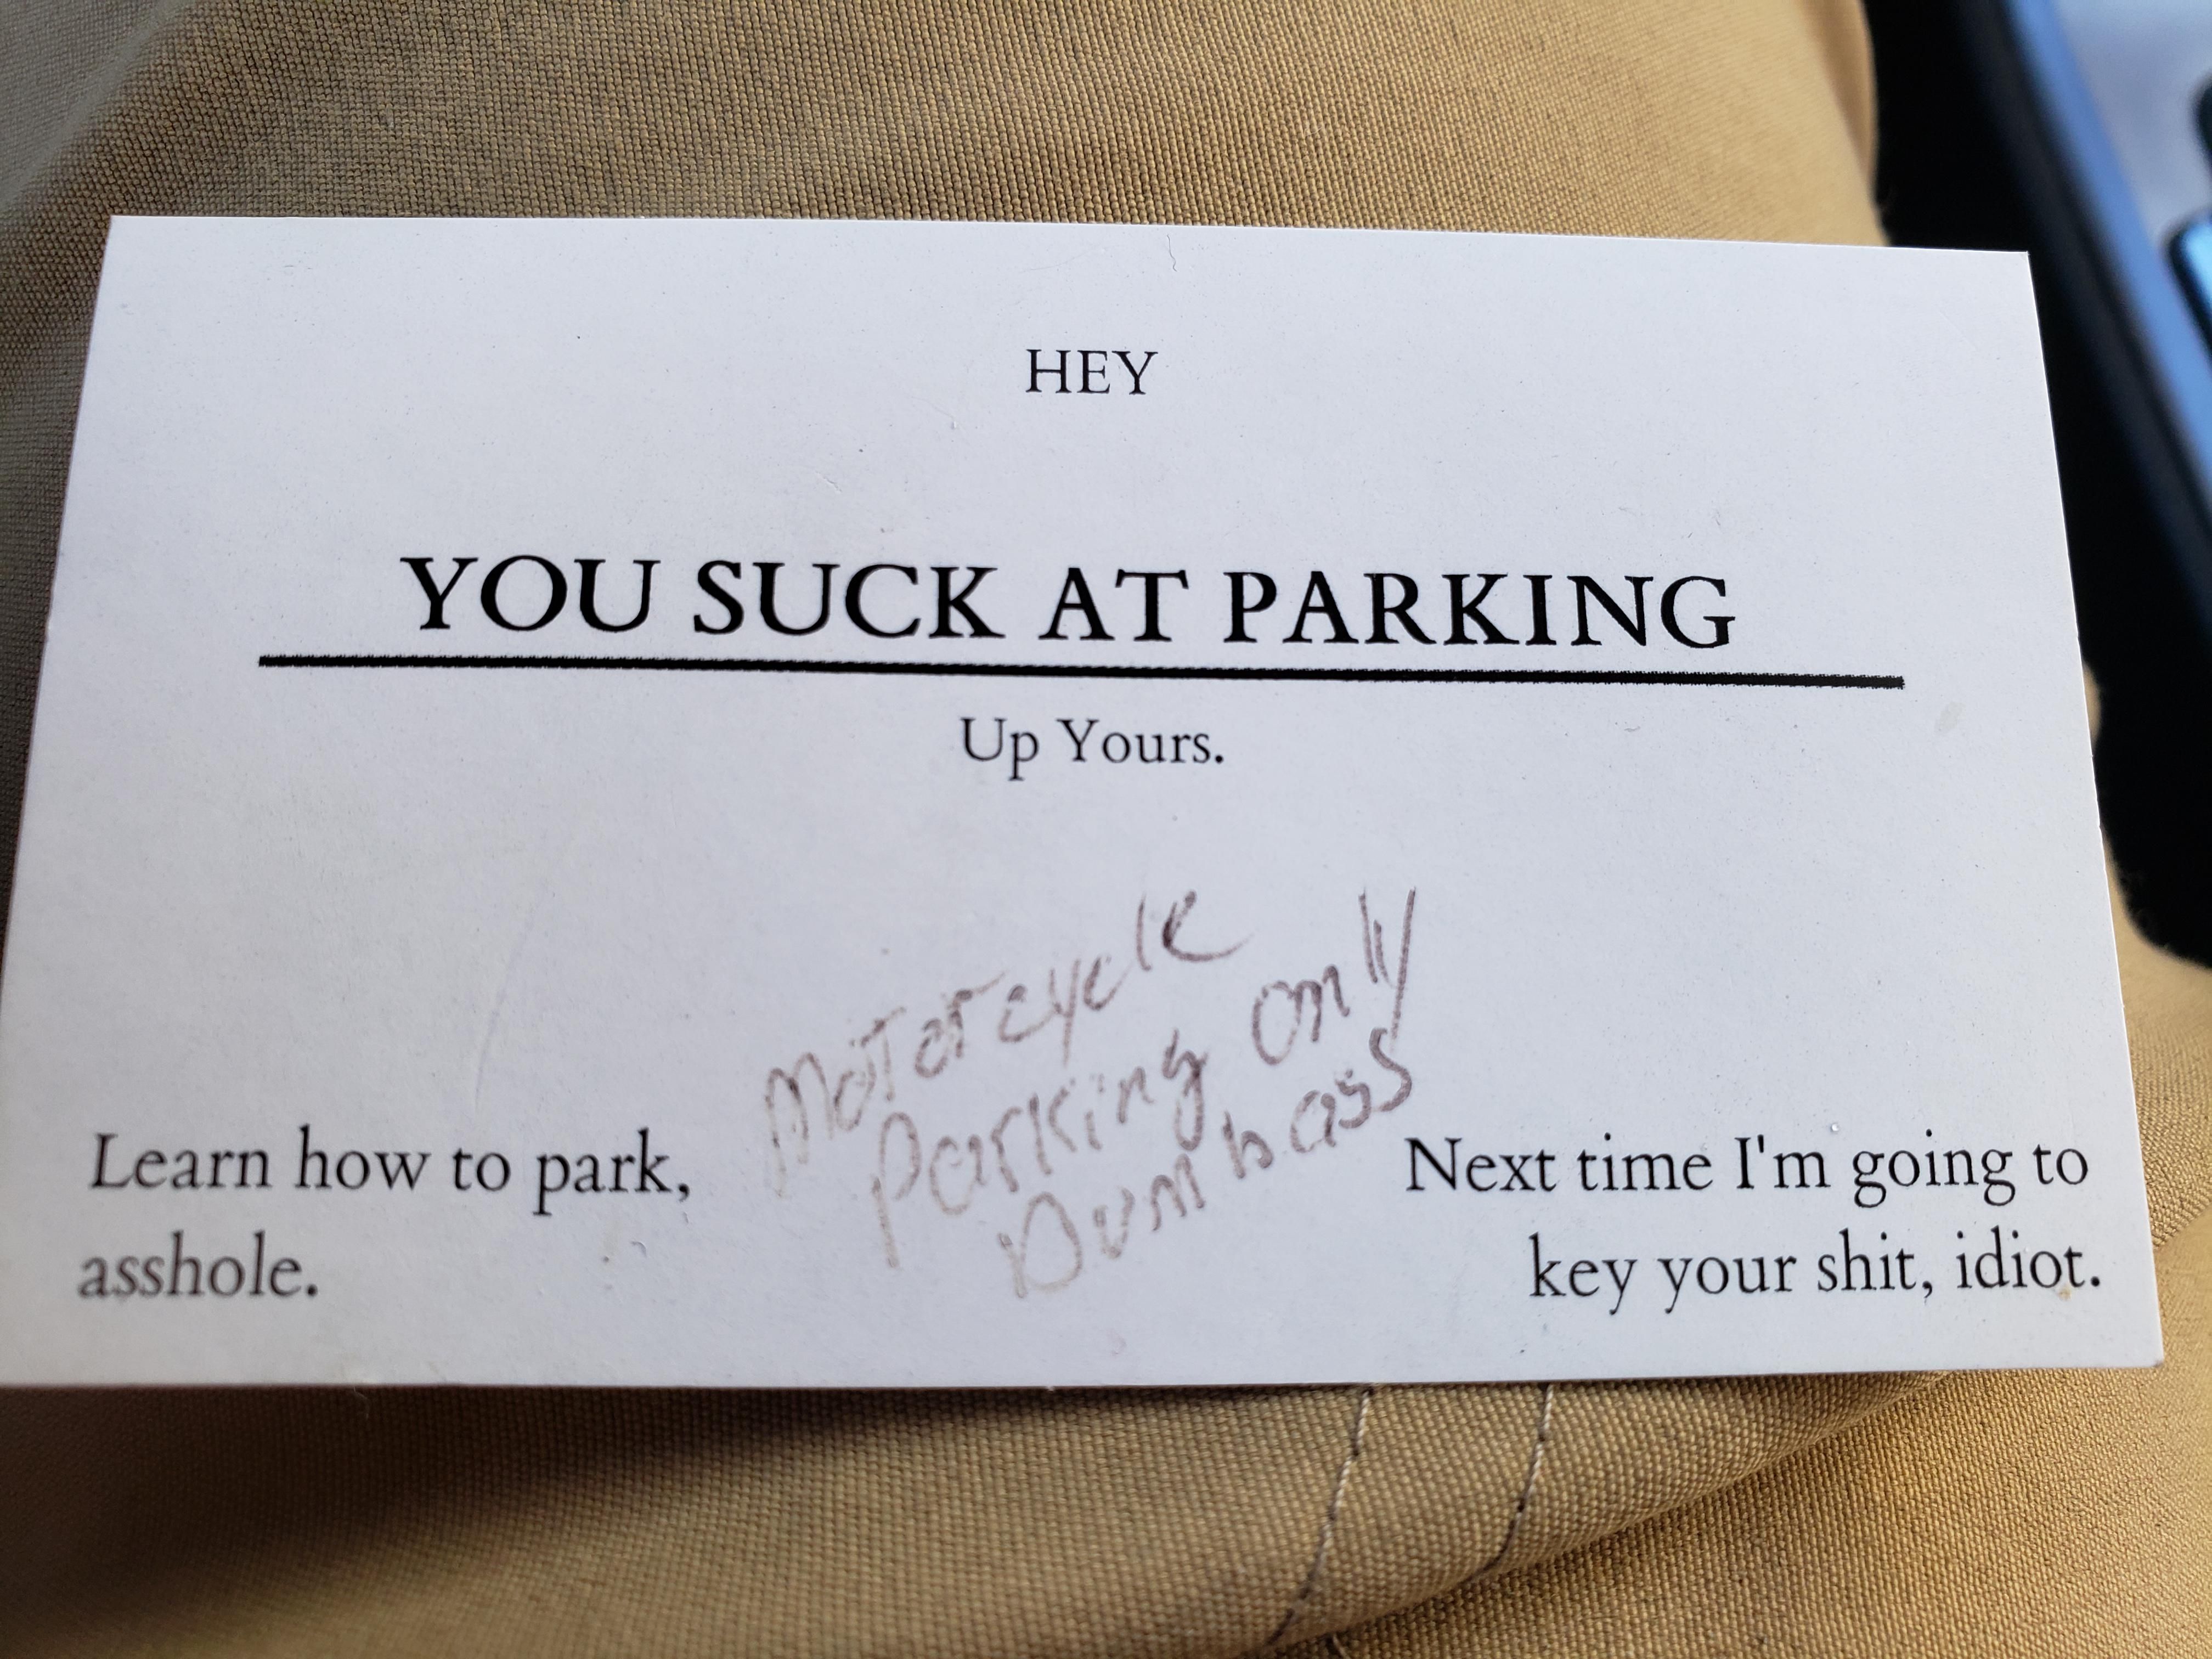 Business card my wife got after "accidentally" parking in motorcycle only parking spot. At least I got a hearty laugh.